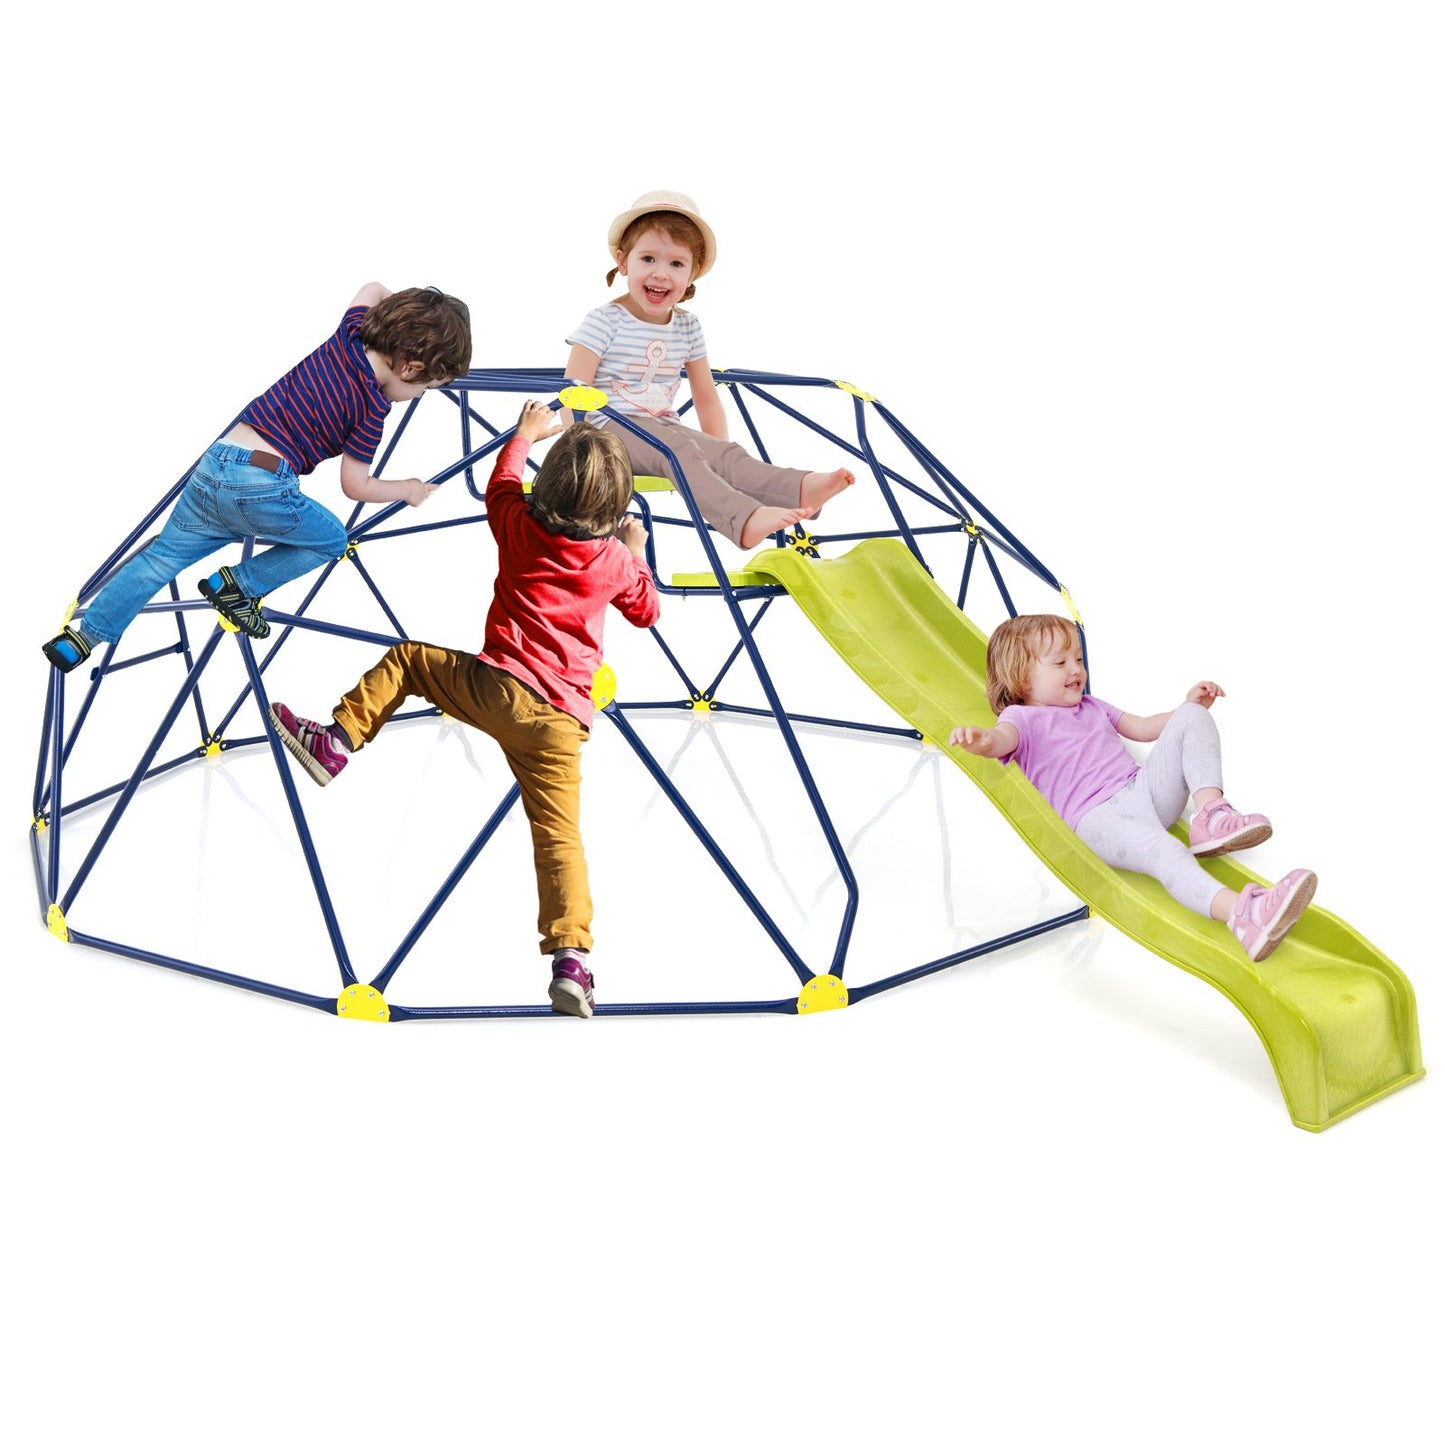 13.3 FT Climbing Dome Geometric Dome Climber with Extended Wavy Slide and 2 Rest Platforms, Multicolor